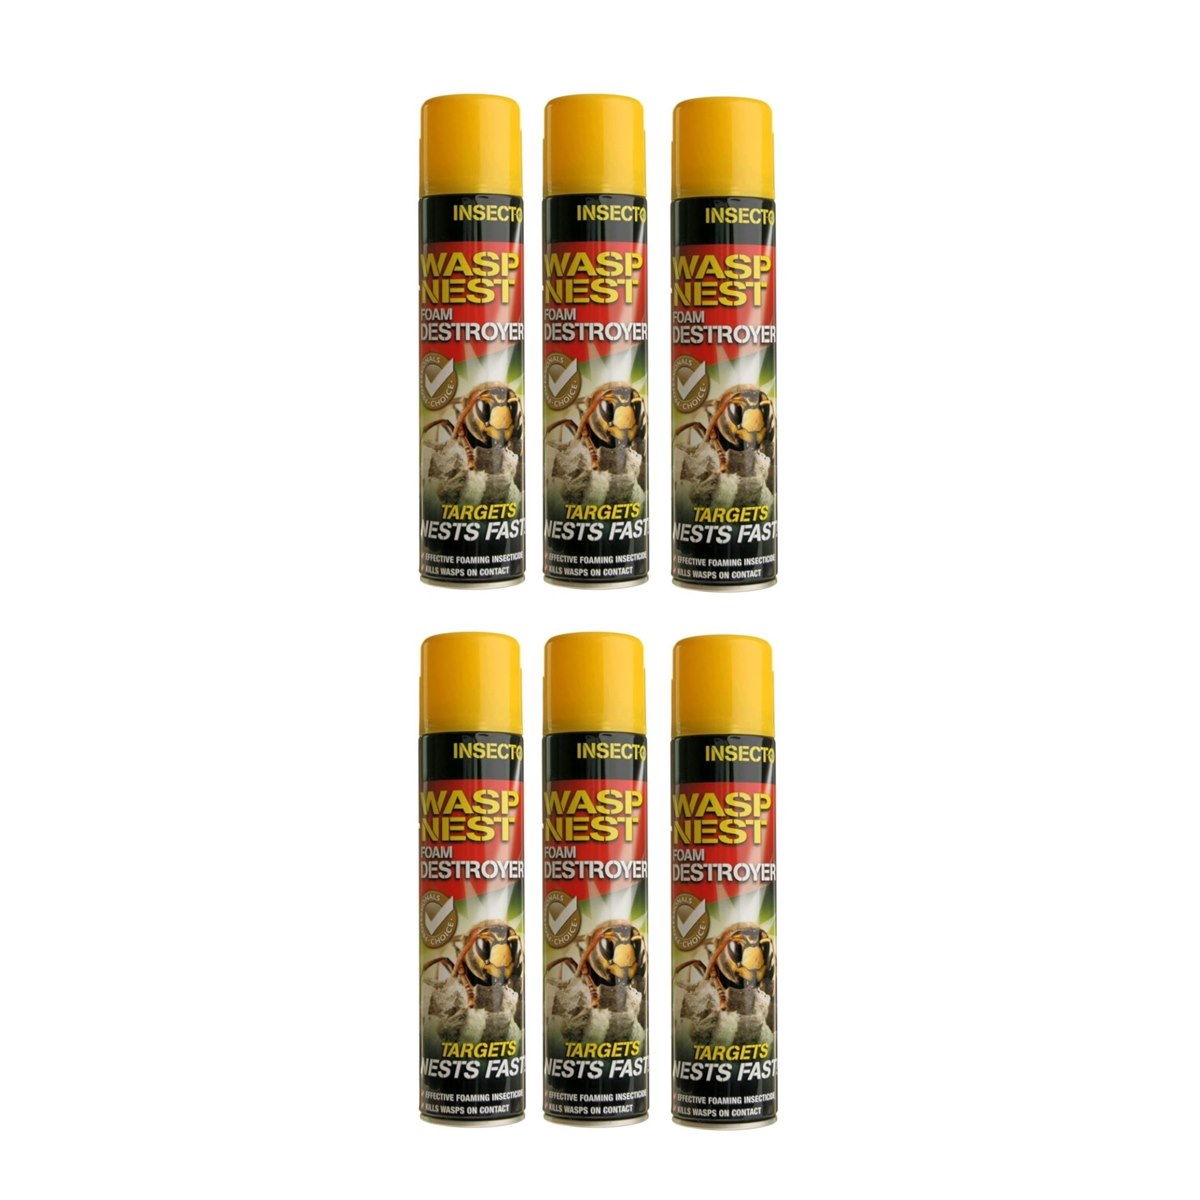 Case of 6 x Insecto Pro Formula Wasp Nest Destroyer Foam 300ml